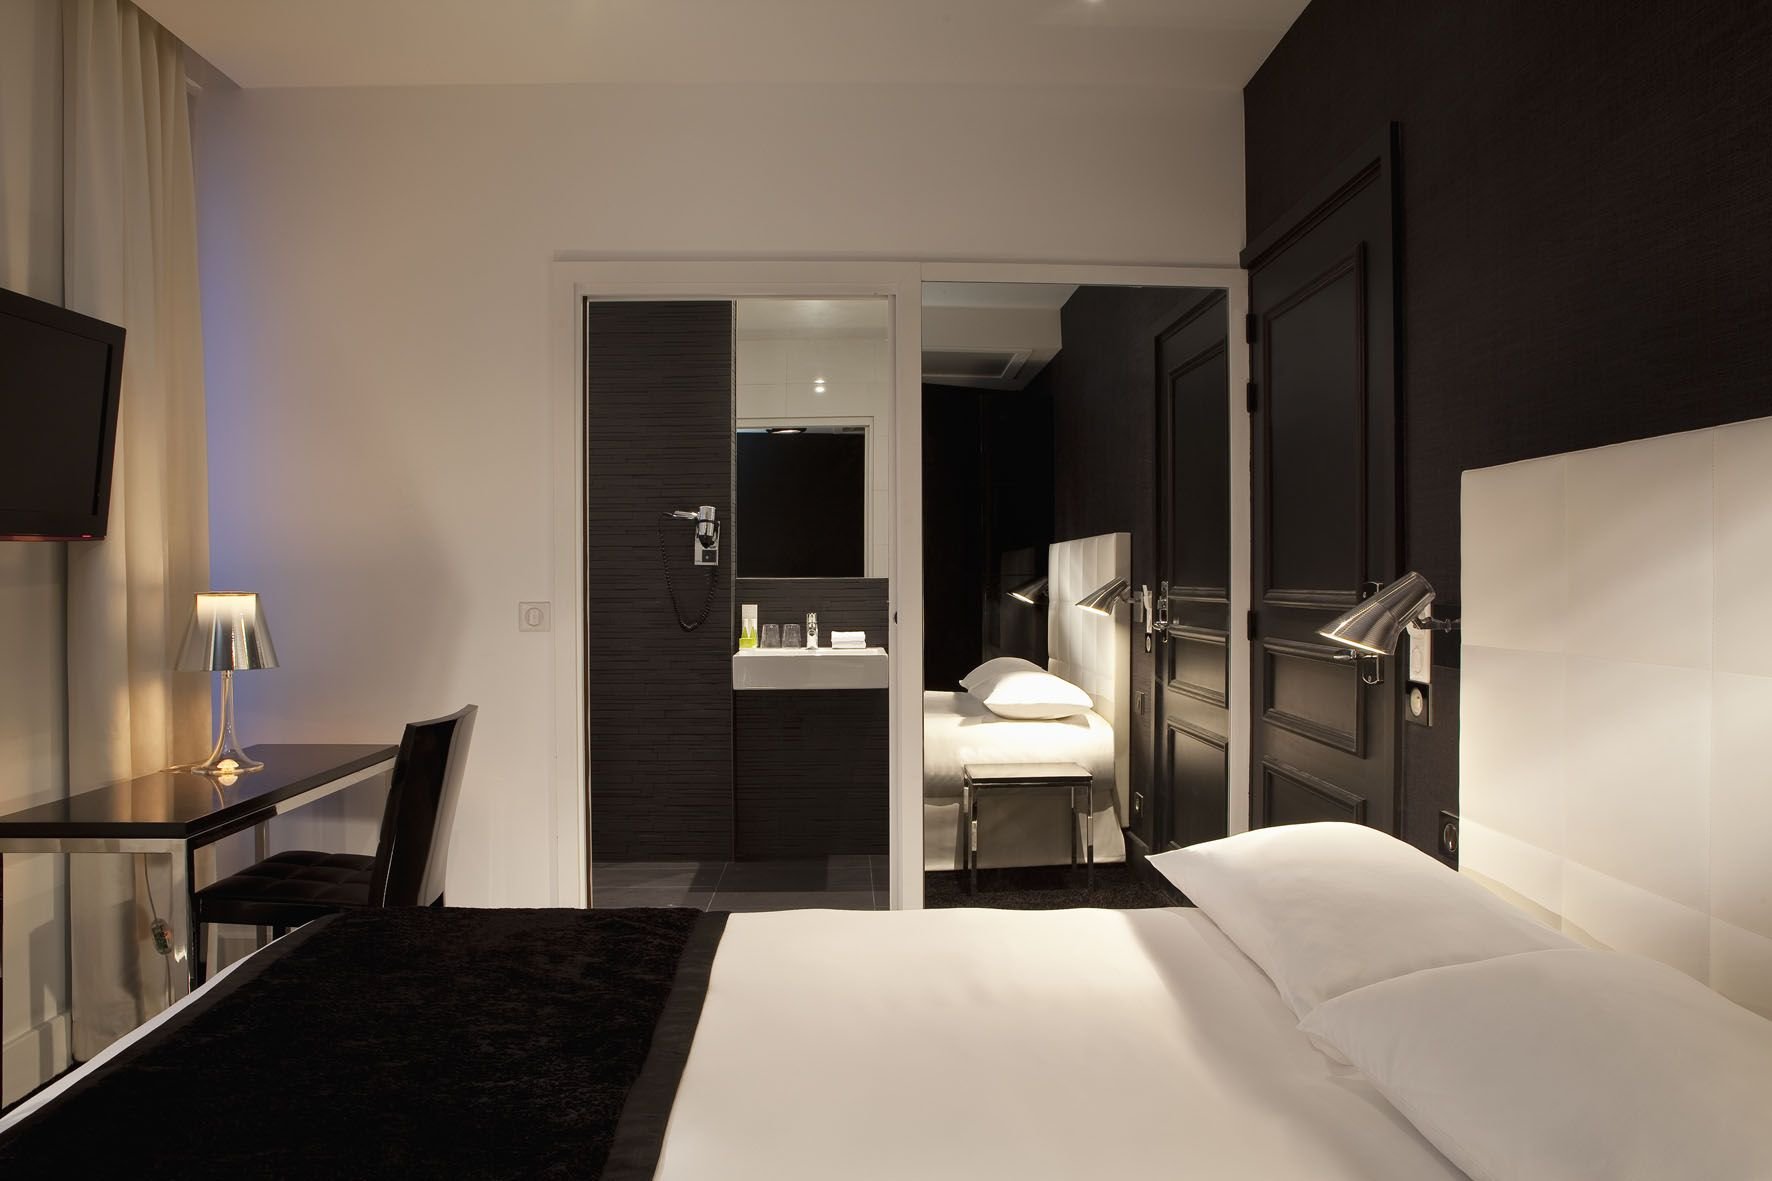 366/Chambres/First_Hotel_Chambre_16.jpg